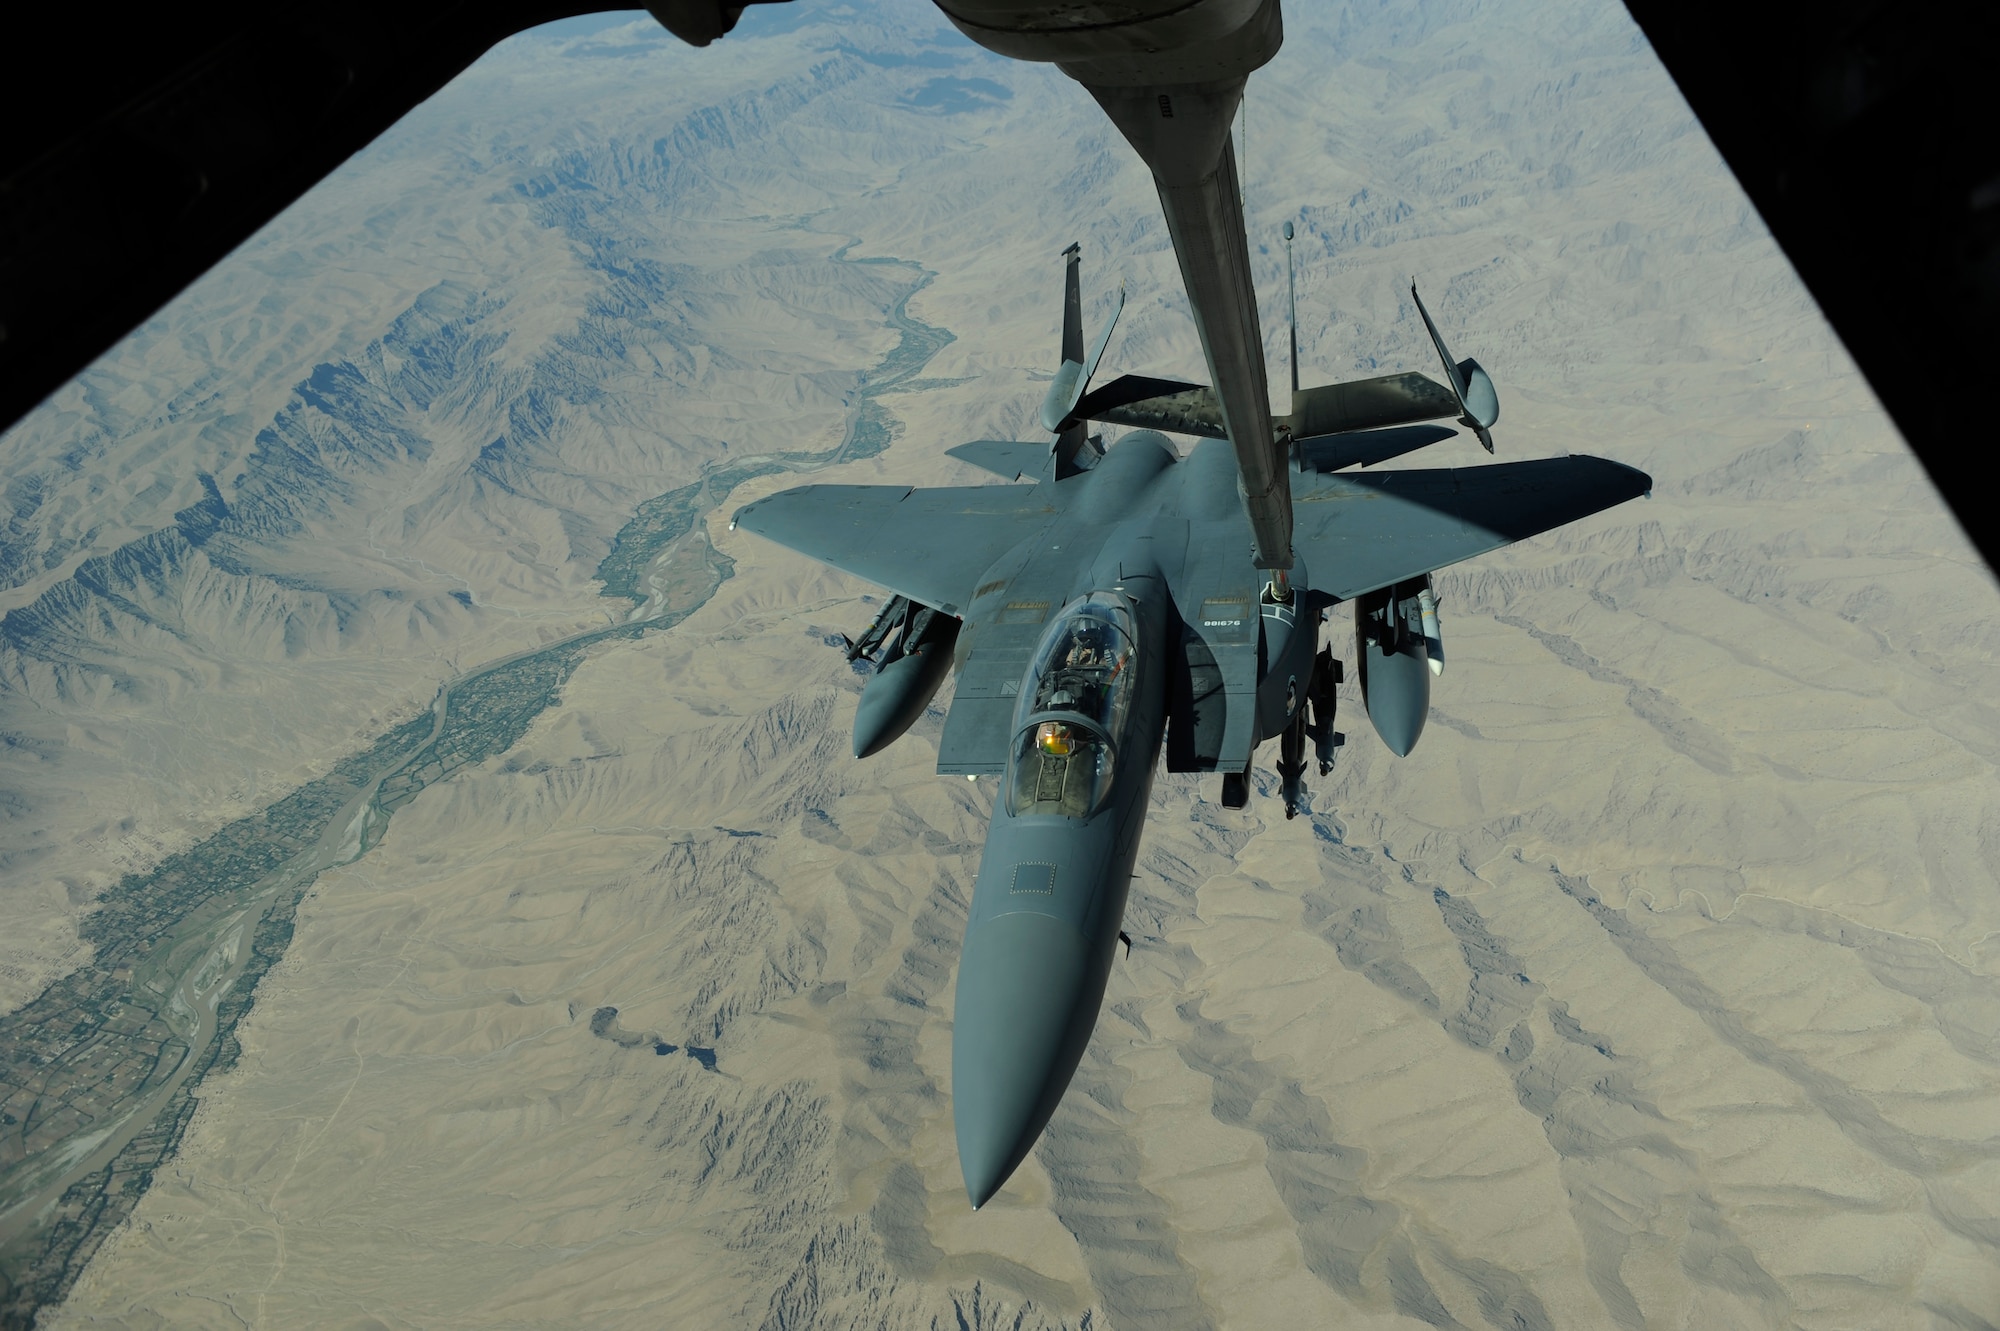 A U.S. Air Force F-15E Strike Eagle aircraft receives fuel from the aerial refueling boom of a KC-10 Extender aircraft from the 908th Expeditionary Air Refueling Squadron during combat operations June 17, 2009, over Afghanistan. (U.S. Air Force photo by Staff Sgt. Jason Robertson)